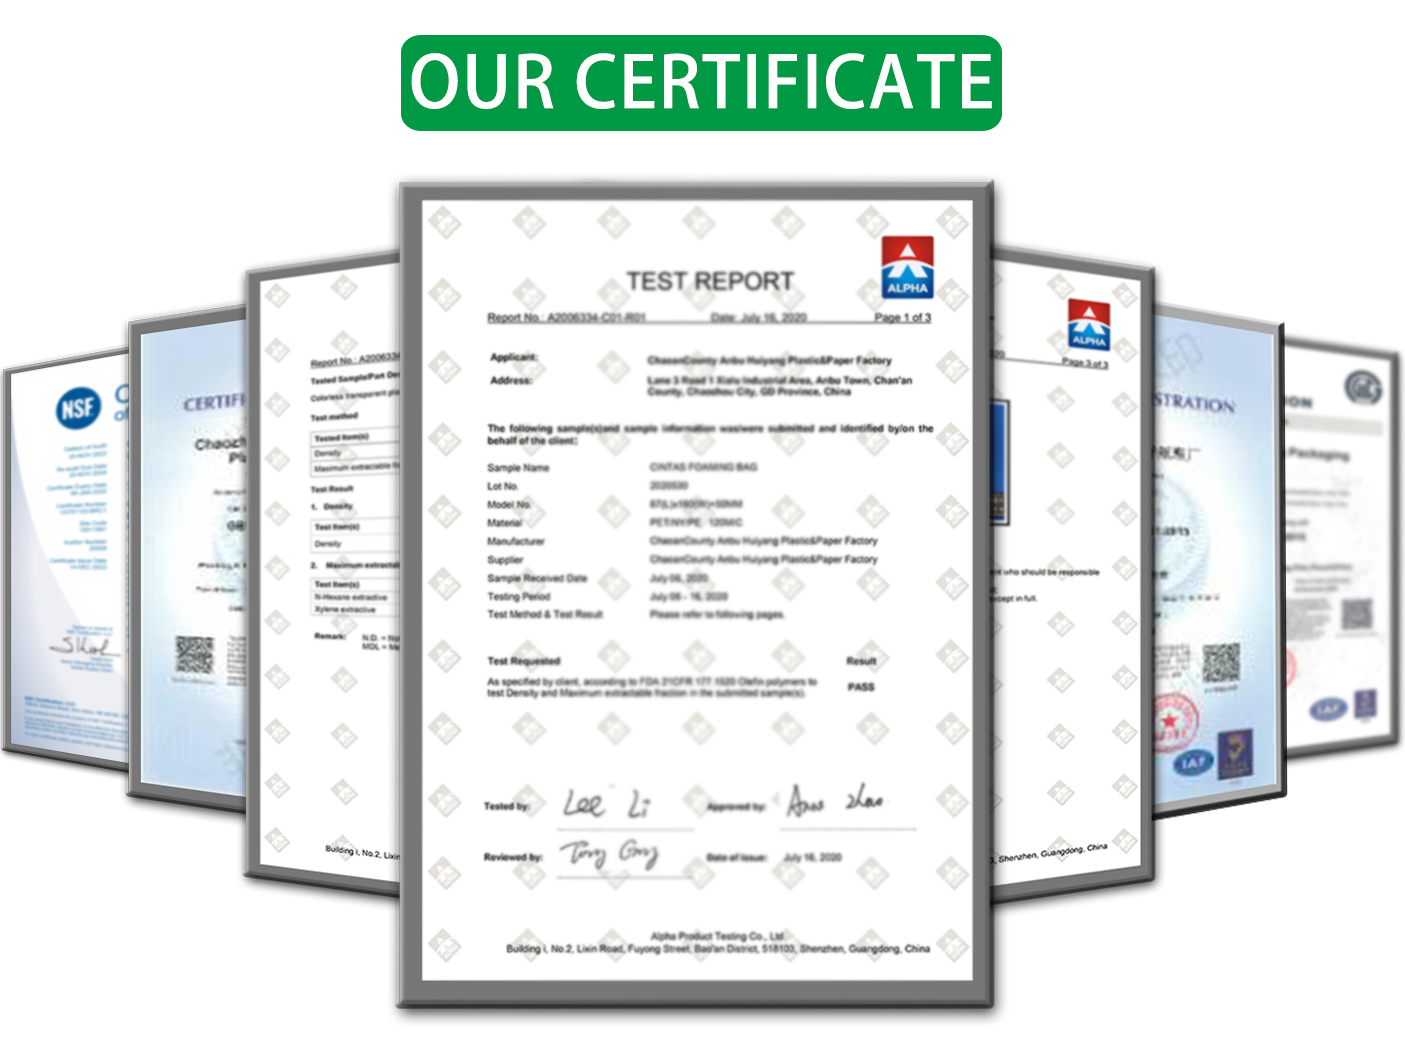 passed ISO, QS, MSDS, FDA and other international product certifications.